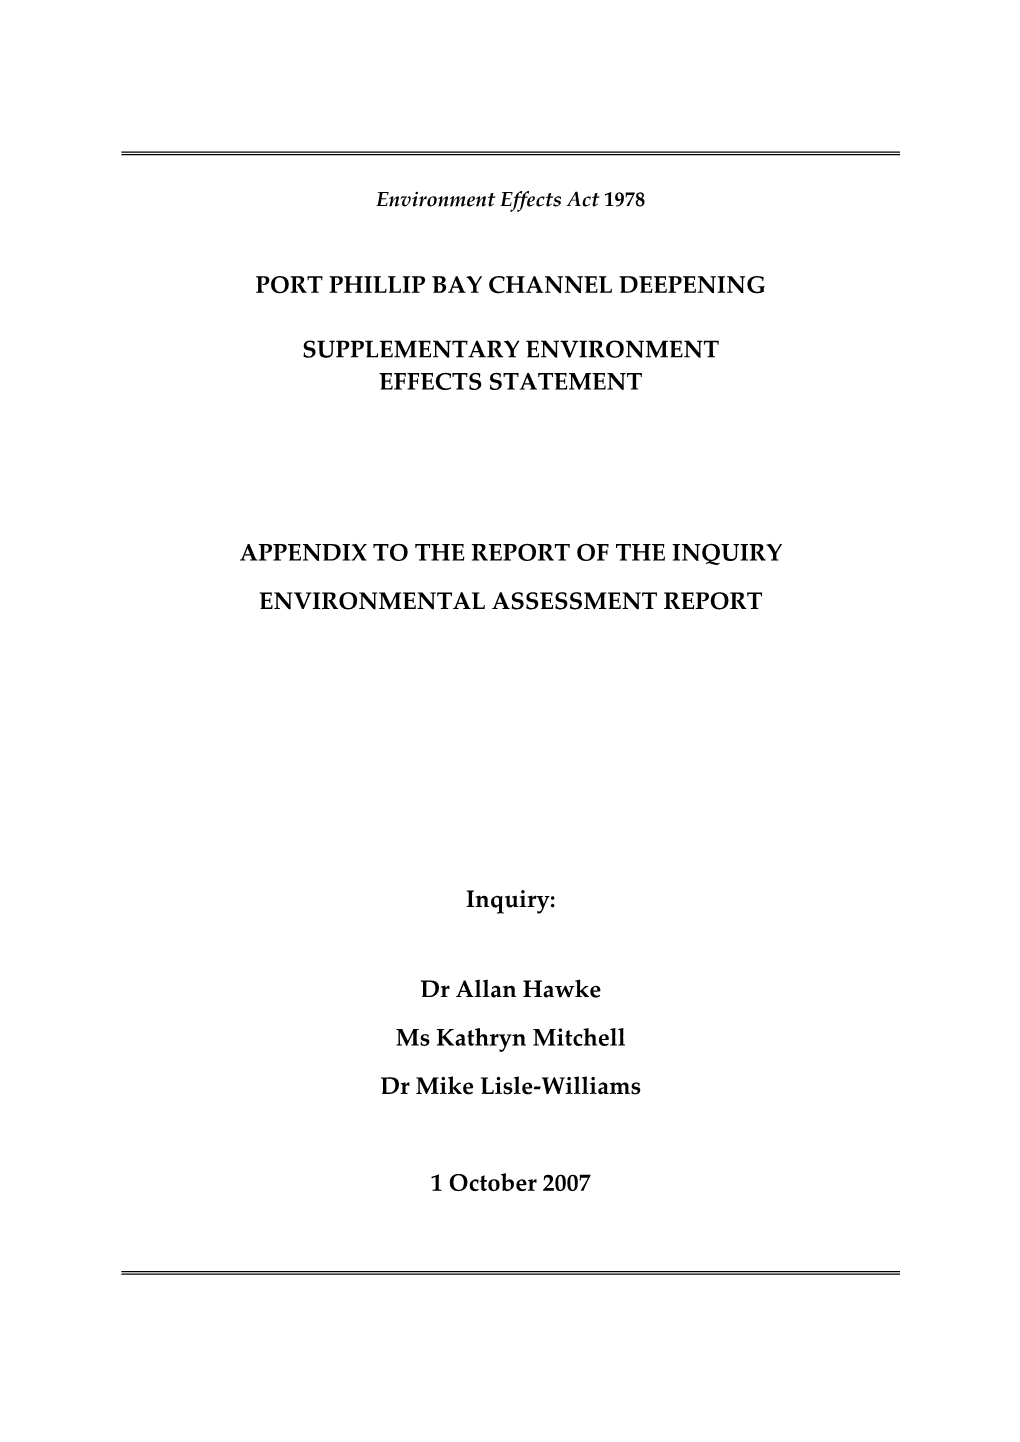 Port Phillip Bay Channel Deepening Supplementary Environment Effects Statement Appendix to the Report of the Inquiry Environment